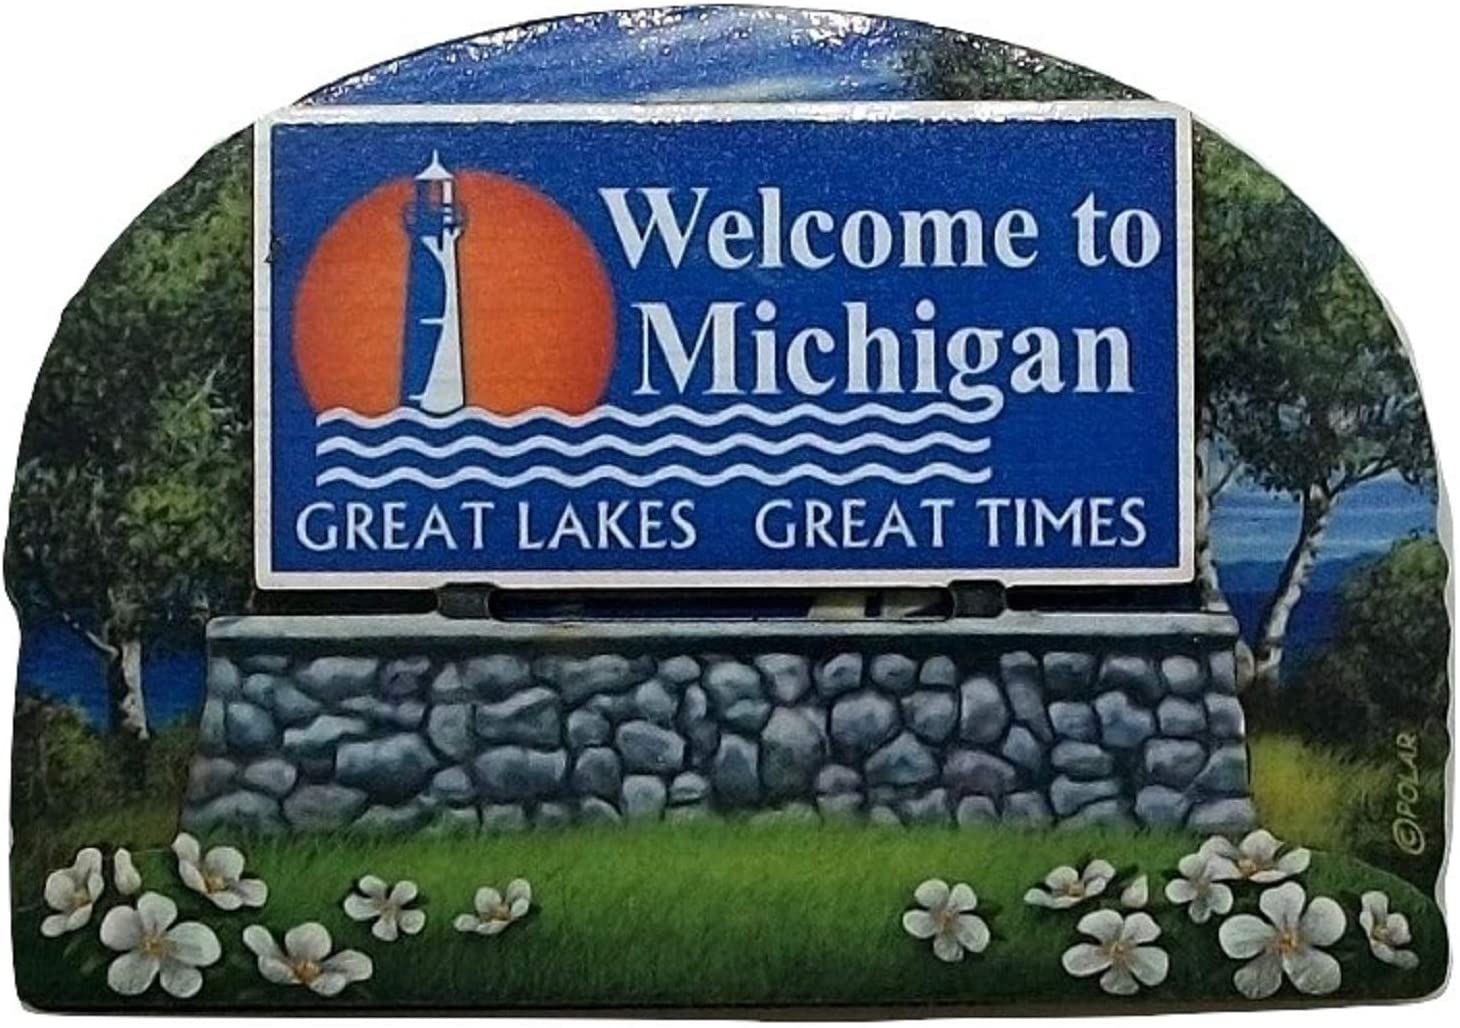 Welcome to Michigan sign painted